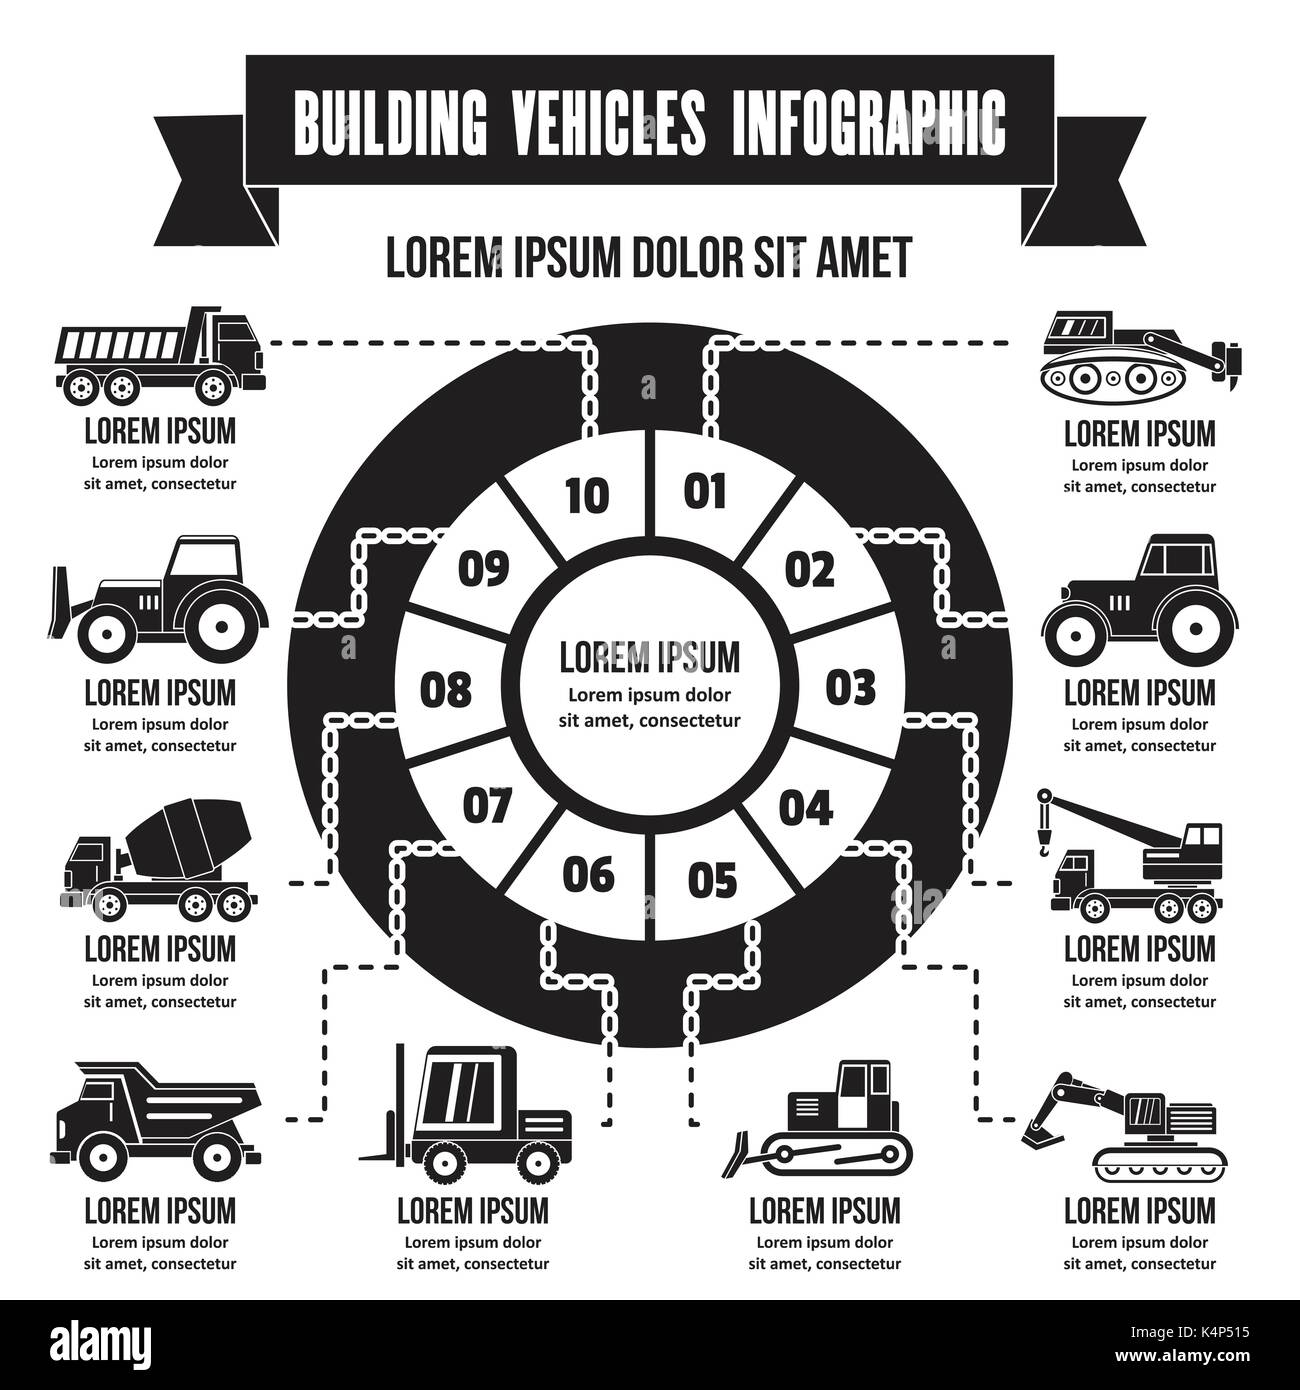 Building vehicles infographic, simple style Stock Vector